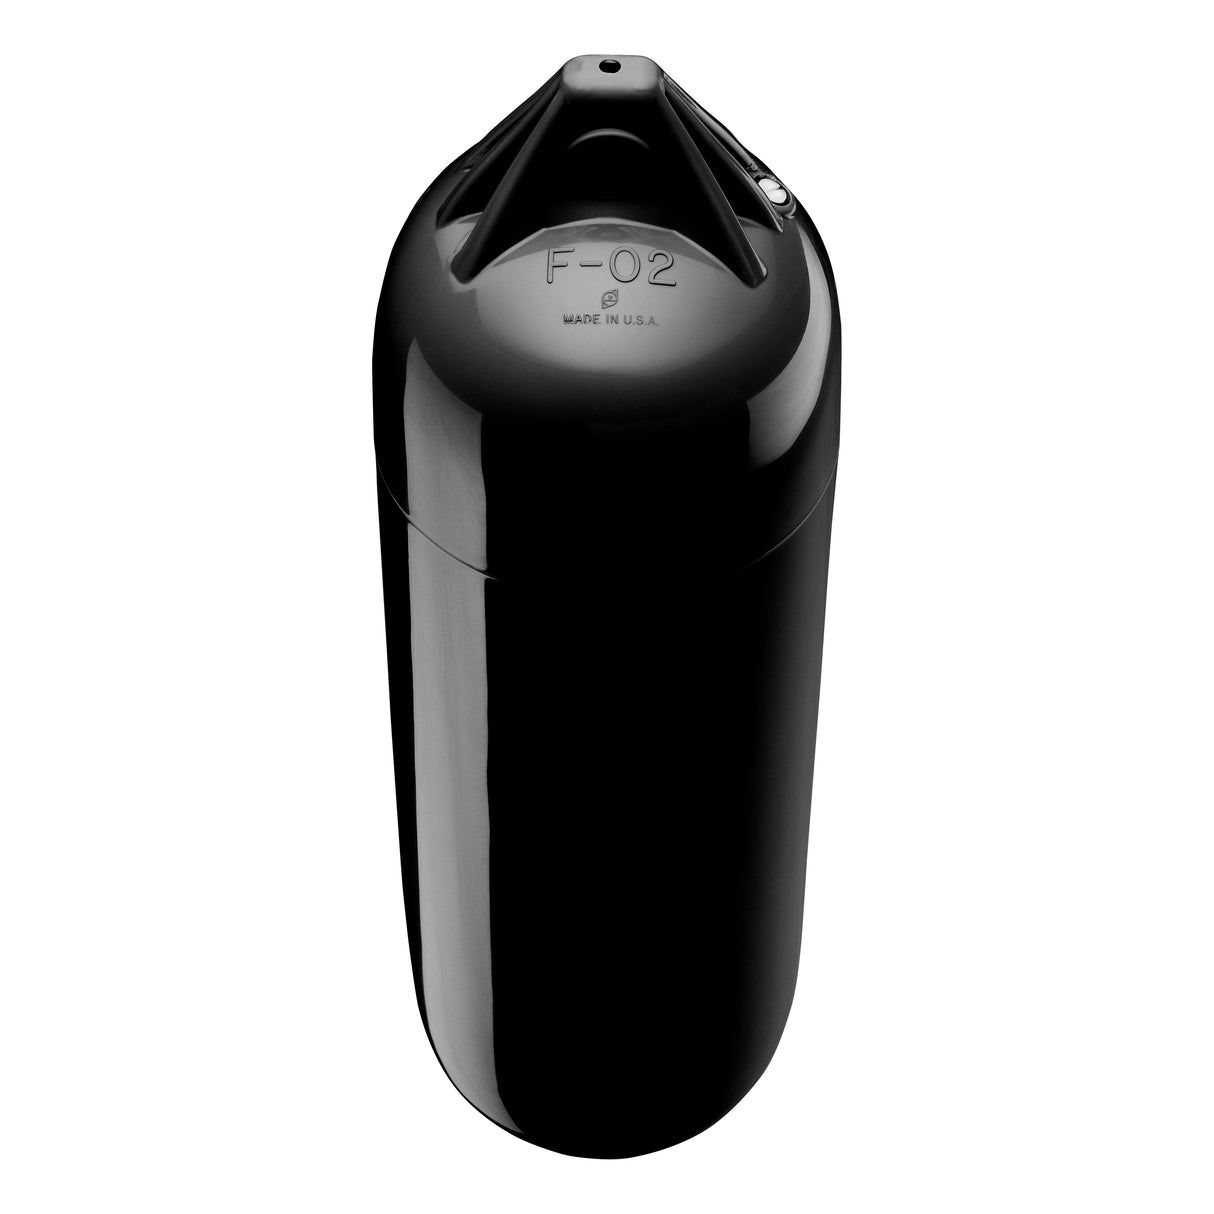 All Black boat fender with Black-Top, Polyform F-02 angled shot